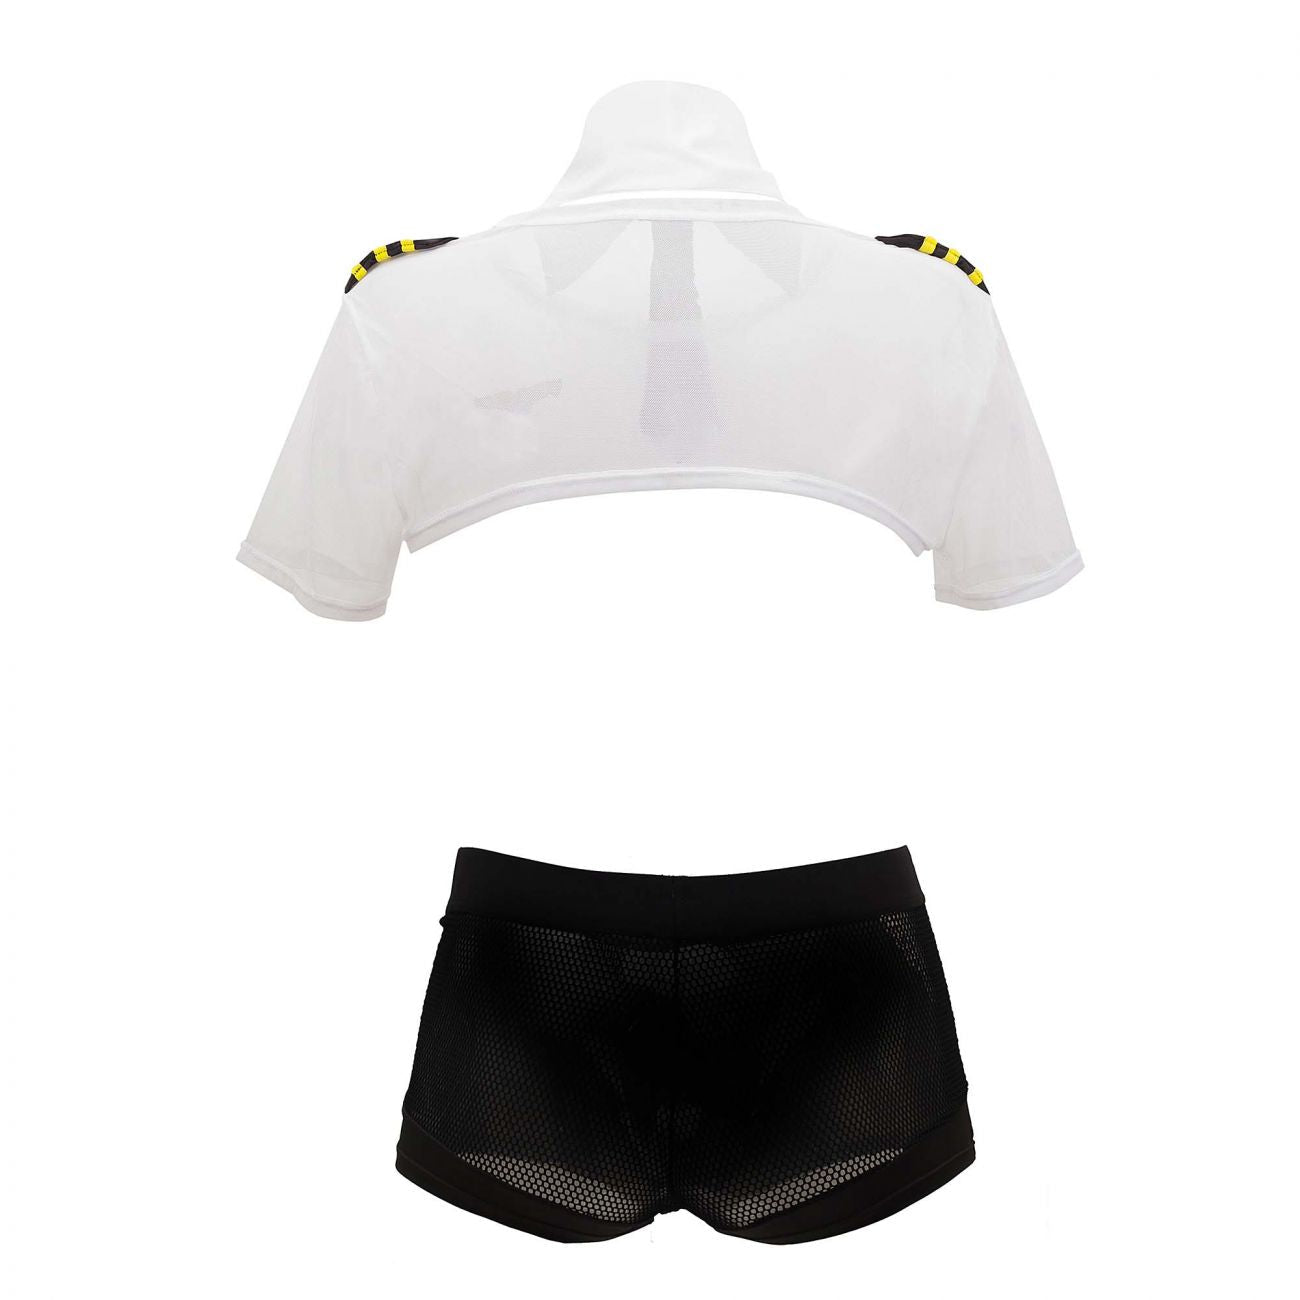 CandyMan 99561 Pilot Costume Outfit Black & White